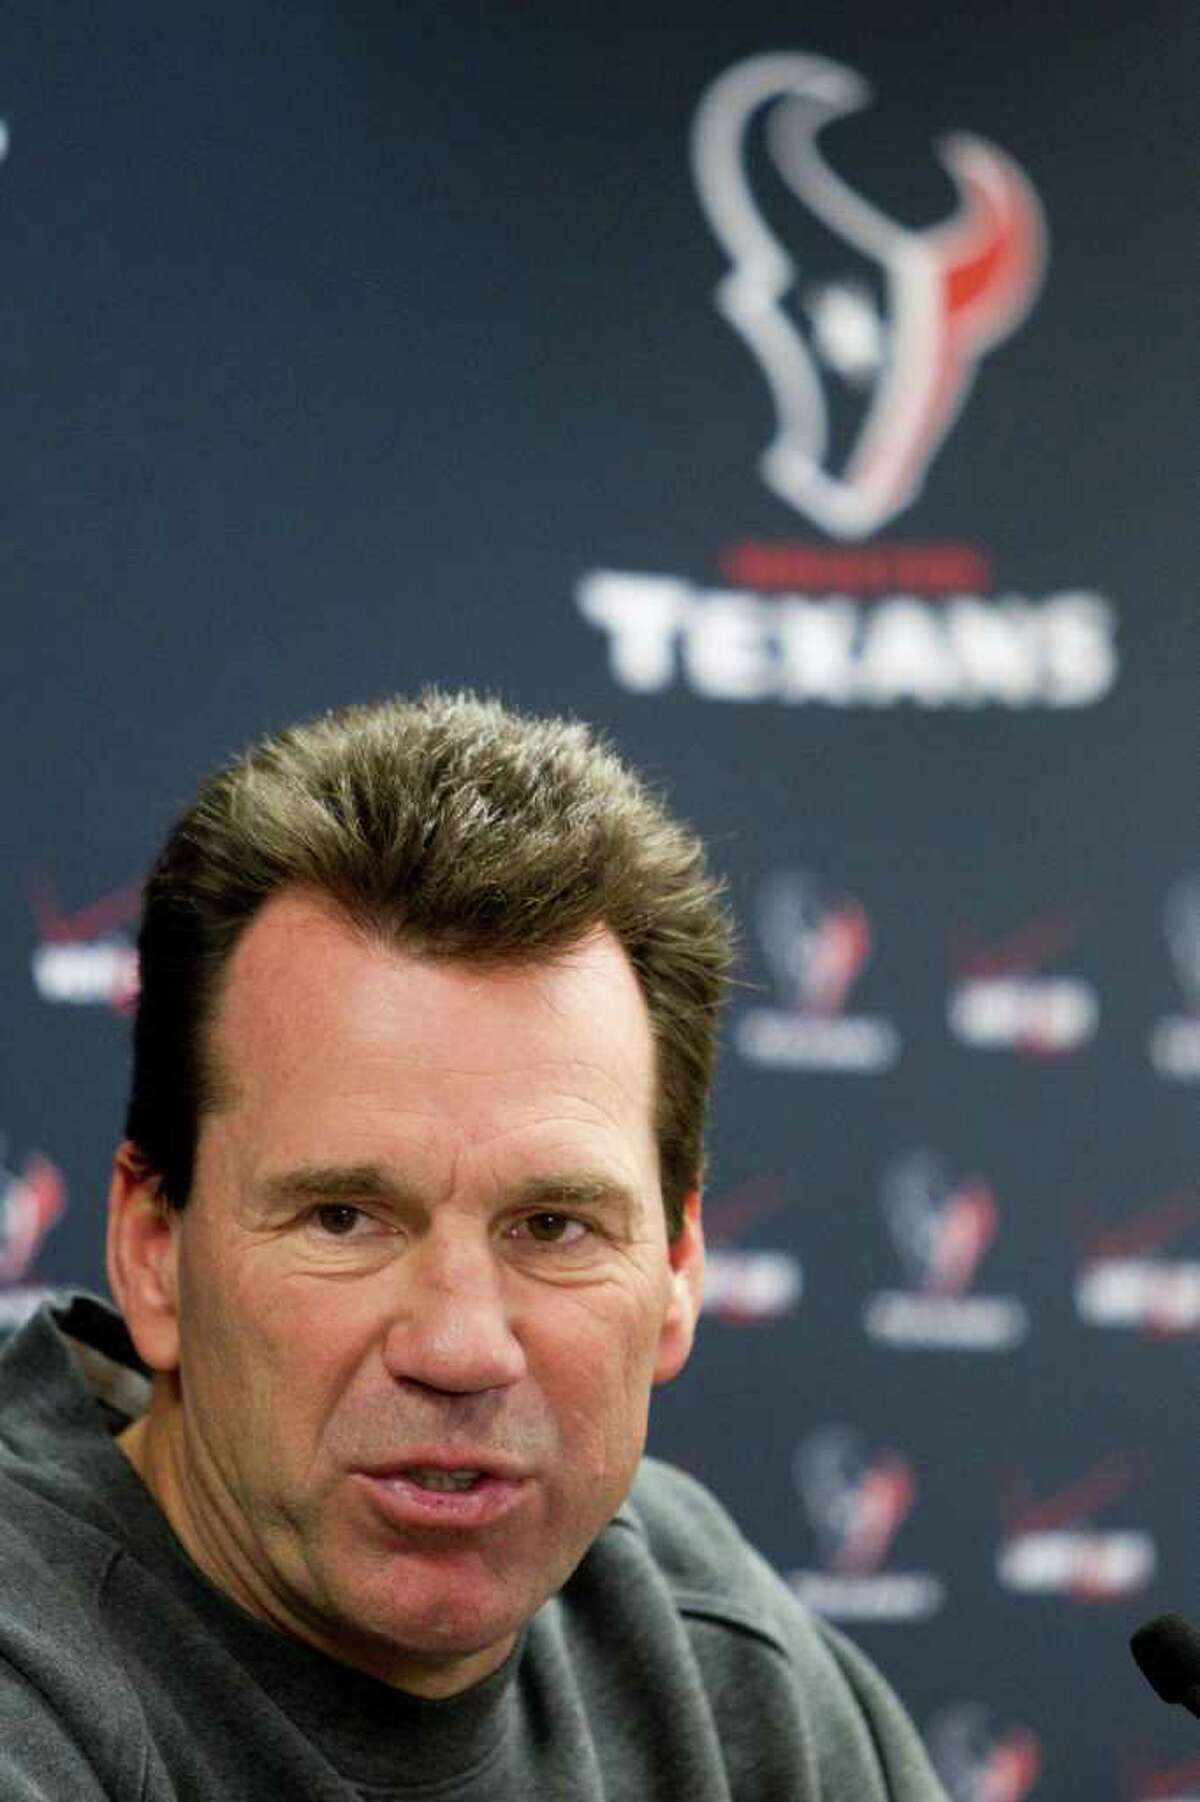 Houston Texans head coach Gary Kubiak answers questions during a news conference following practice at Reliant Stadium on Wednesday, Jan. 4, 2012, in Houston. The Texans face the Cincinnati Bengals on Saturday in the first NFL playoff football game in team history. ( Brett Coomer / Houston Chronicle )